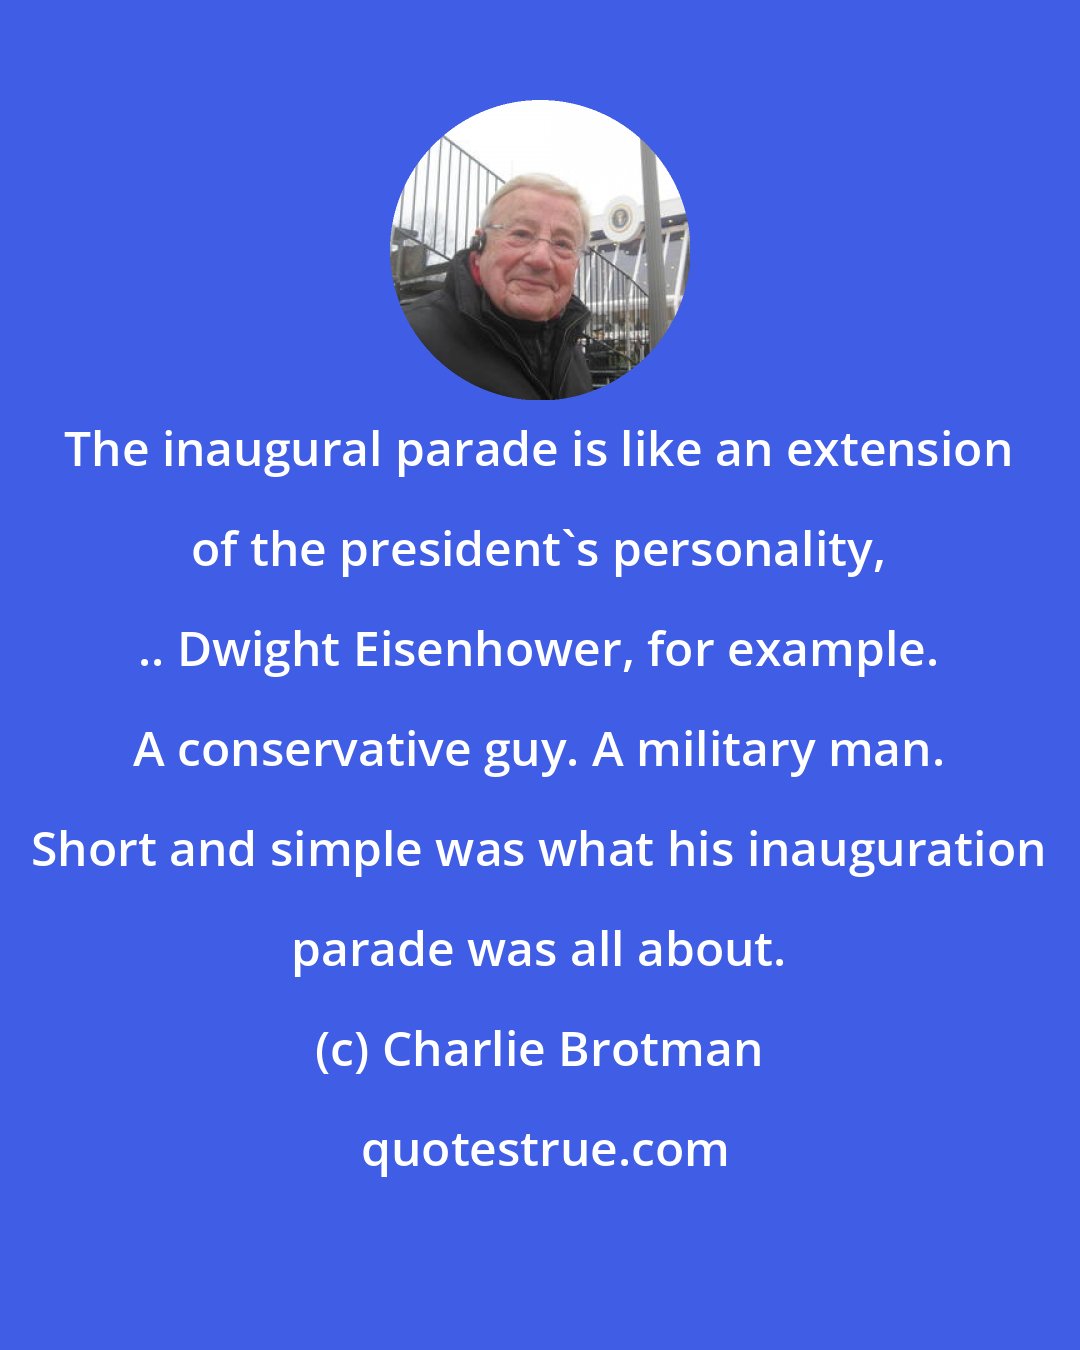 Charlie Brotman: The inaugural parade is like an extension of the president's personality, .. Dwight Eisenhower, for example. A conservative guy. A military man. Short and simple was what his inauguration parade was all about.